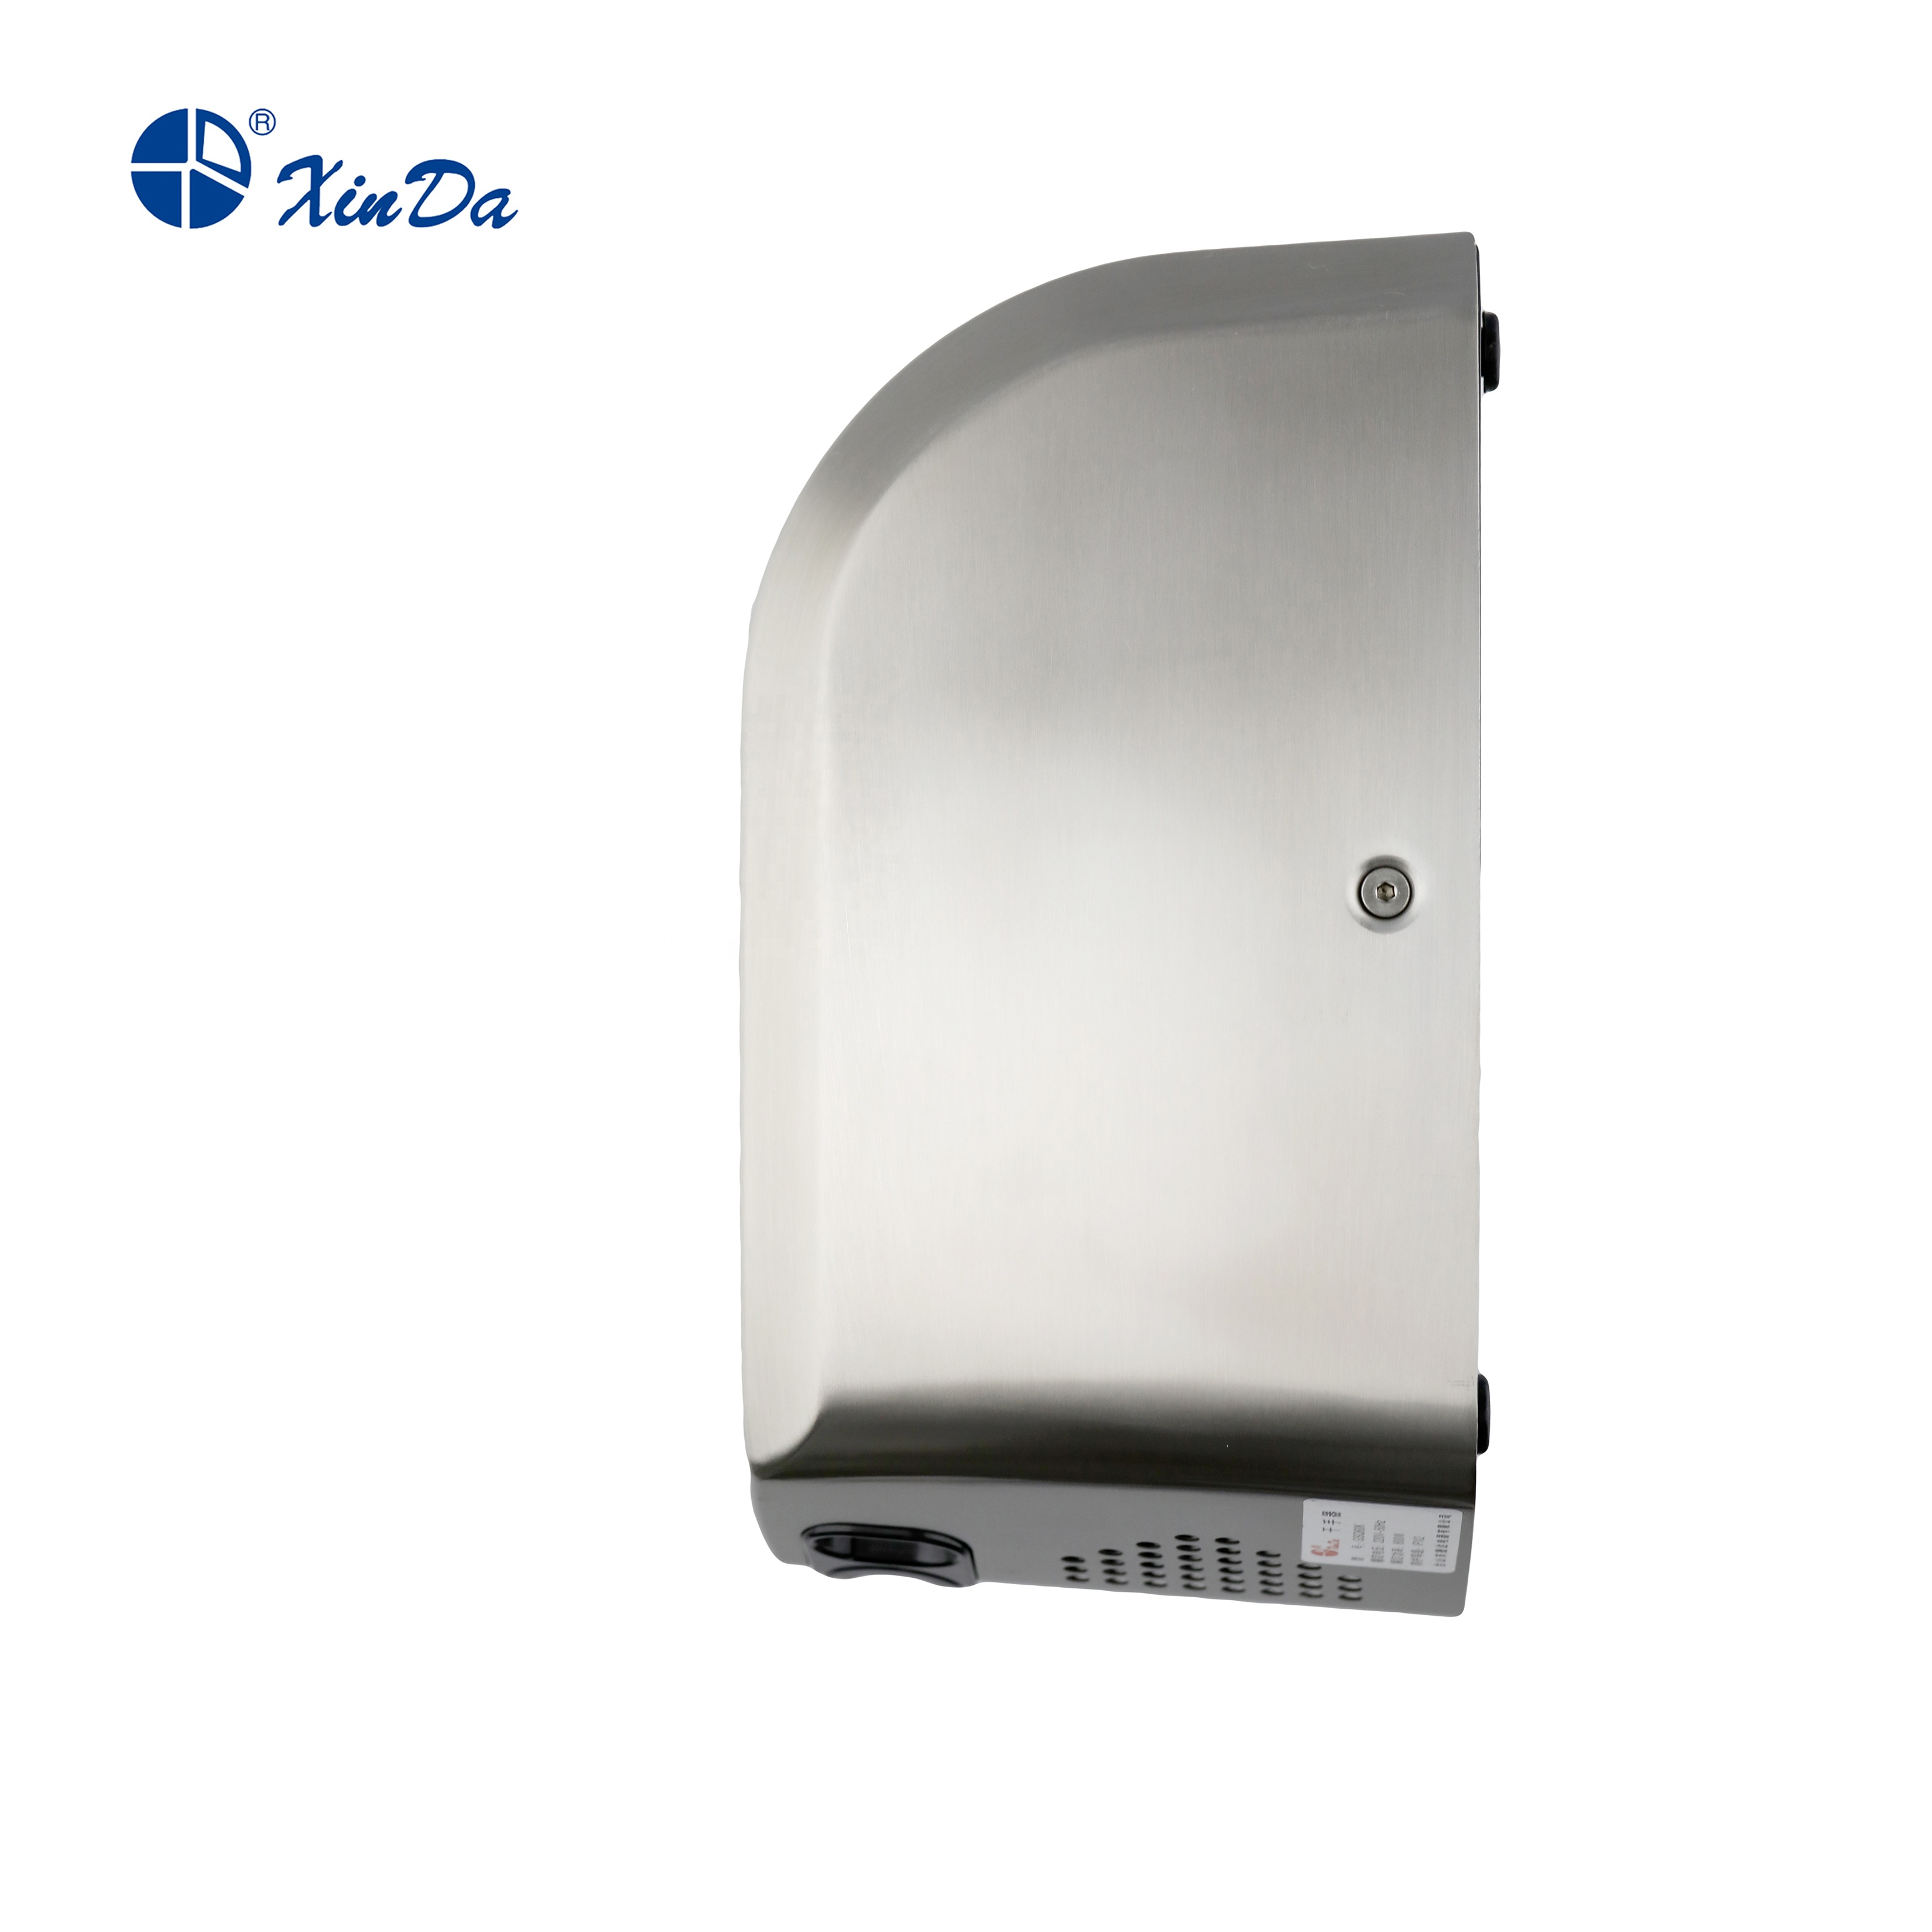 Hand dryer GSQ60K BLDC Stainless Steel Brushless Motor Automatic Infrared Sensor Wall Mounted Hand Dryer